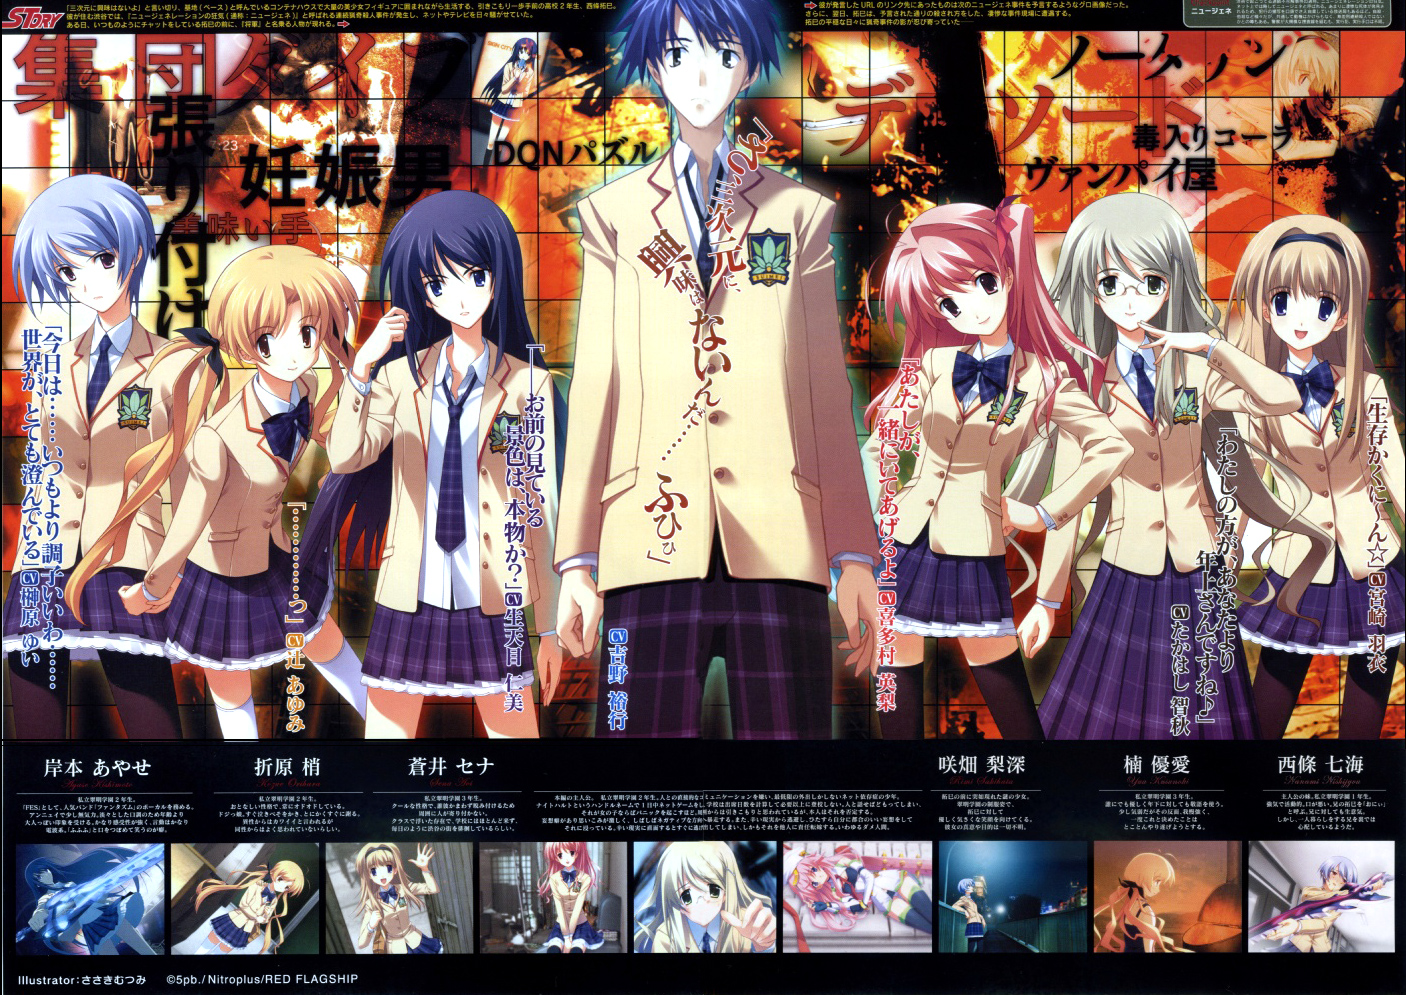 Chaos; Head - The Complete Series - Essentials - Blu-ray | Crunchyroll Store